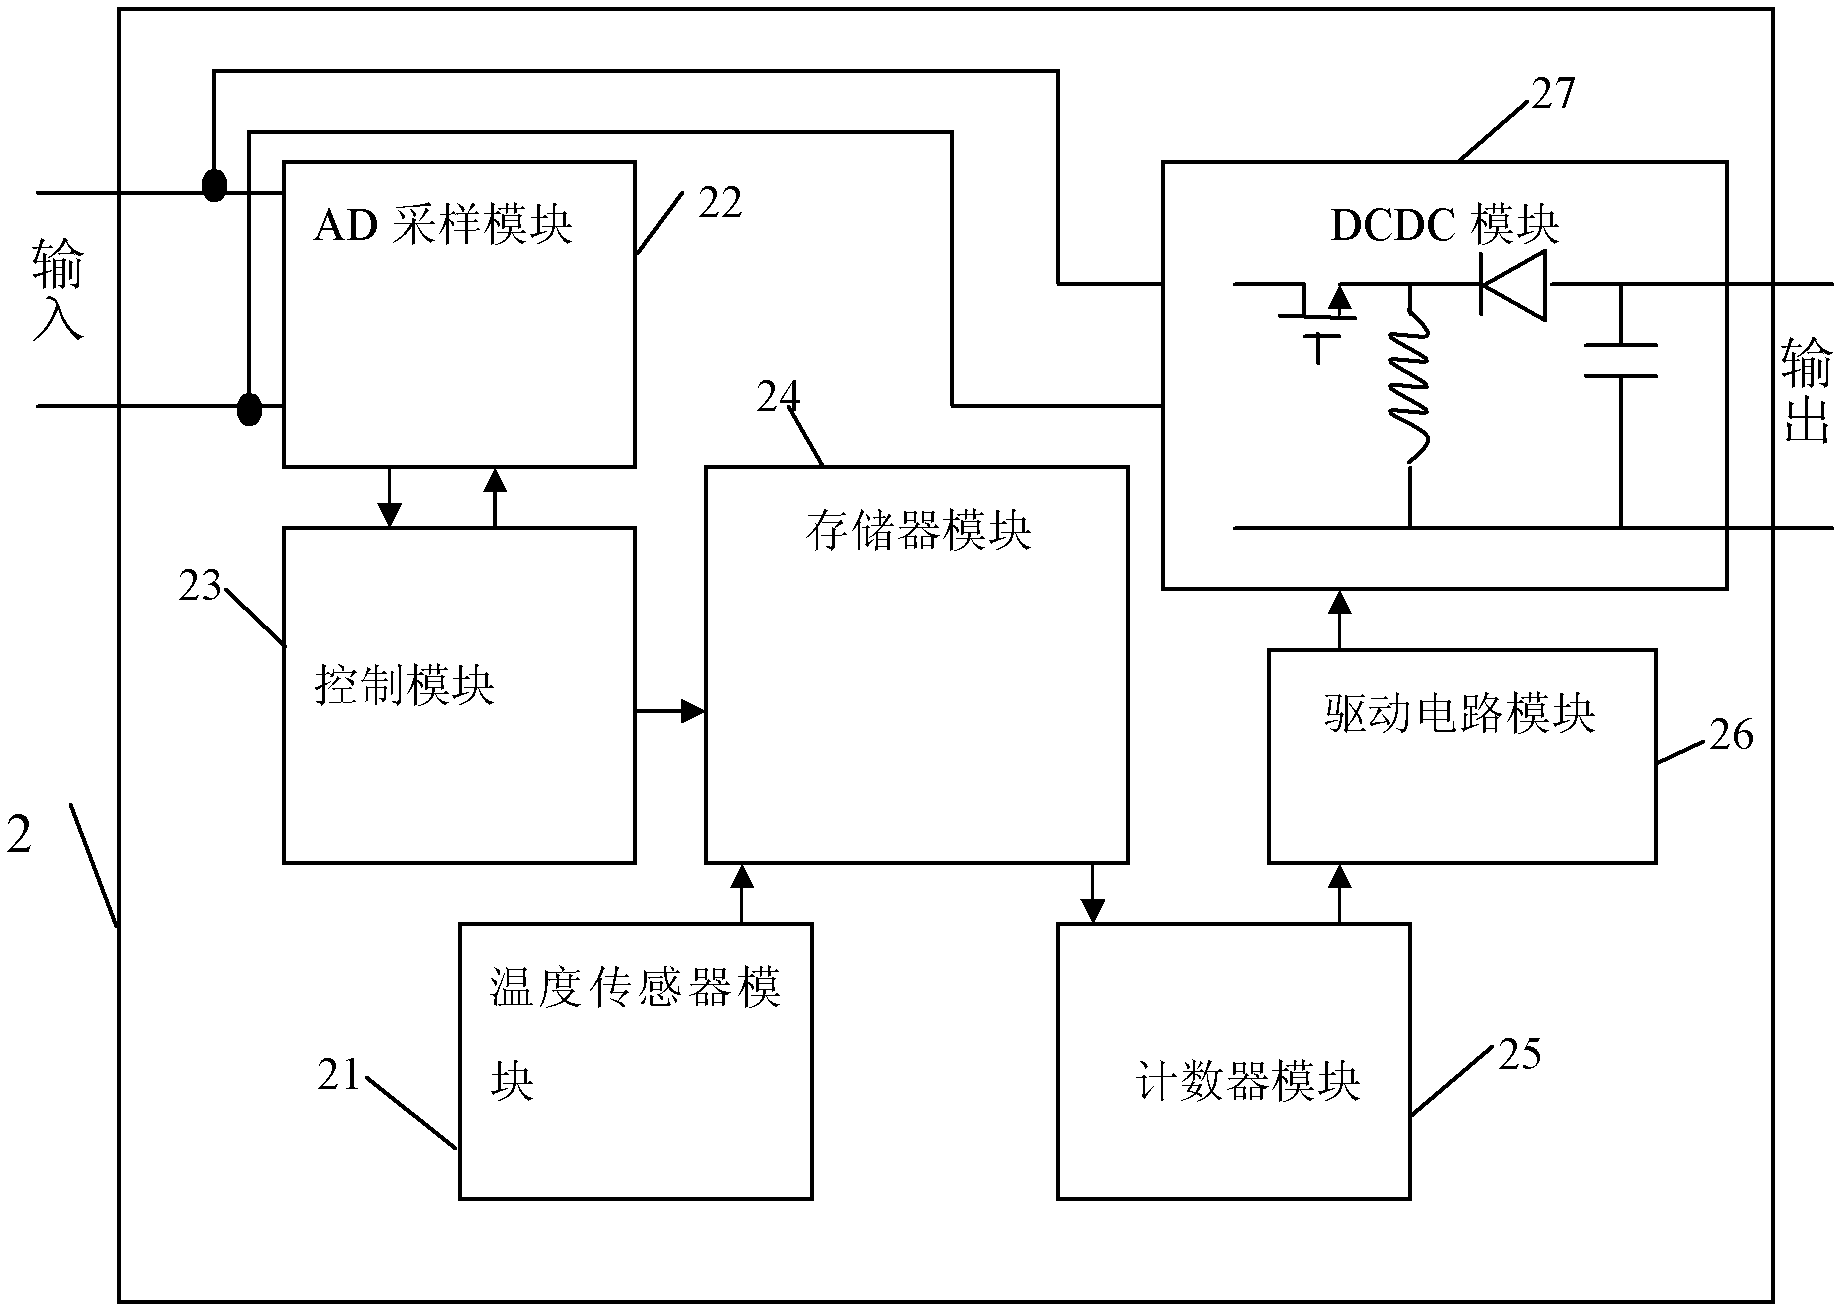 Maximum power point tracking (MPPT) controller for solar photovoltaic system and control method of MPPT controller